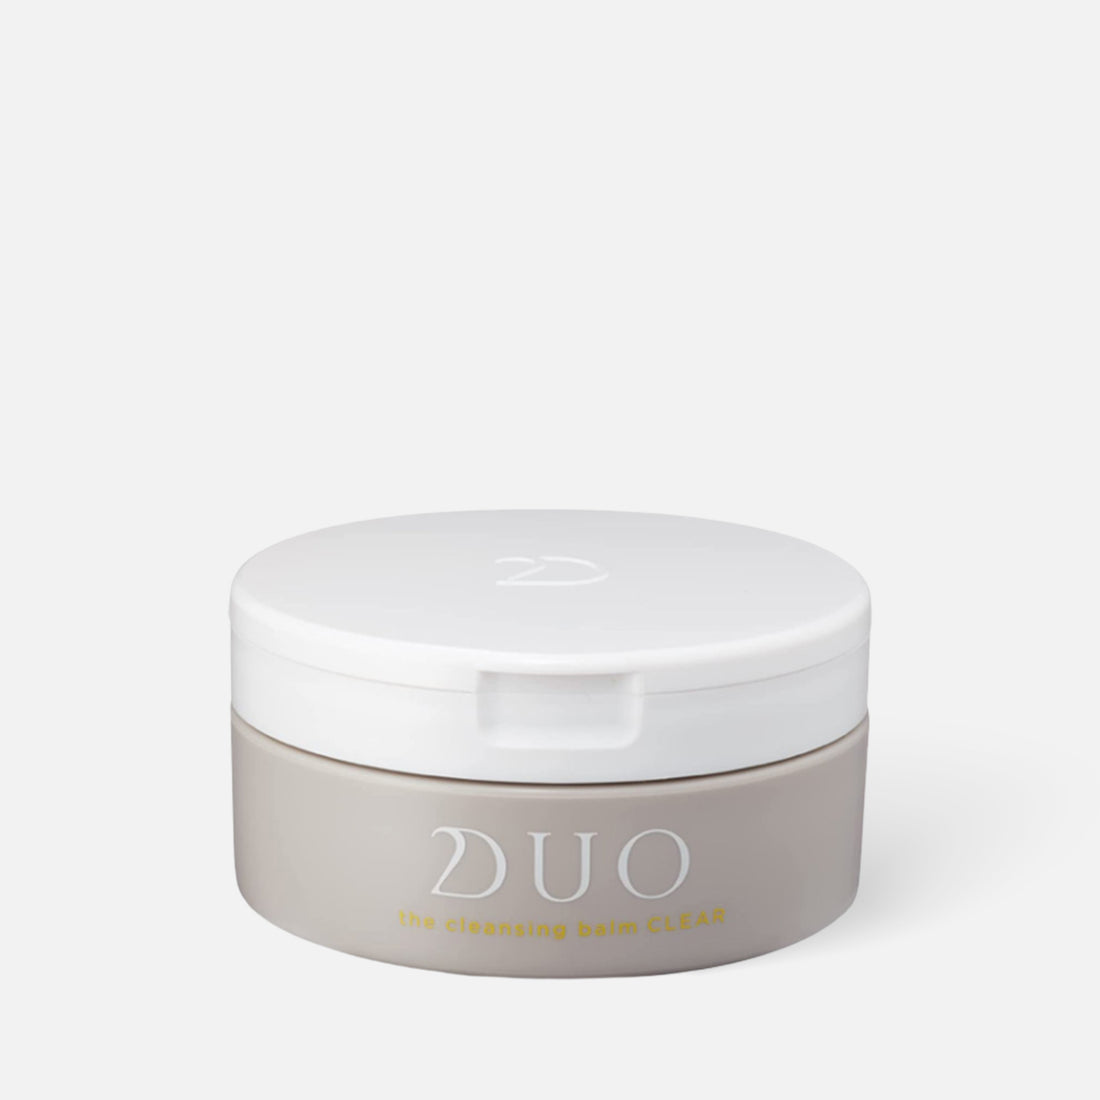 DUO The Cleansing Balm Clear